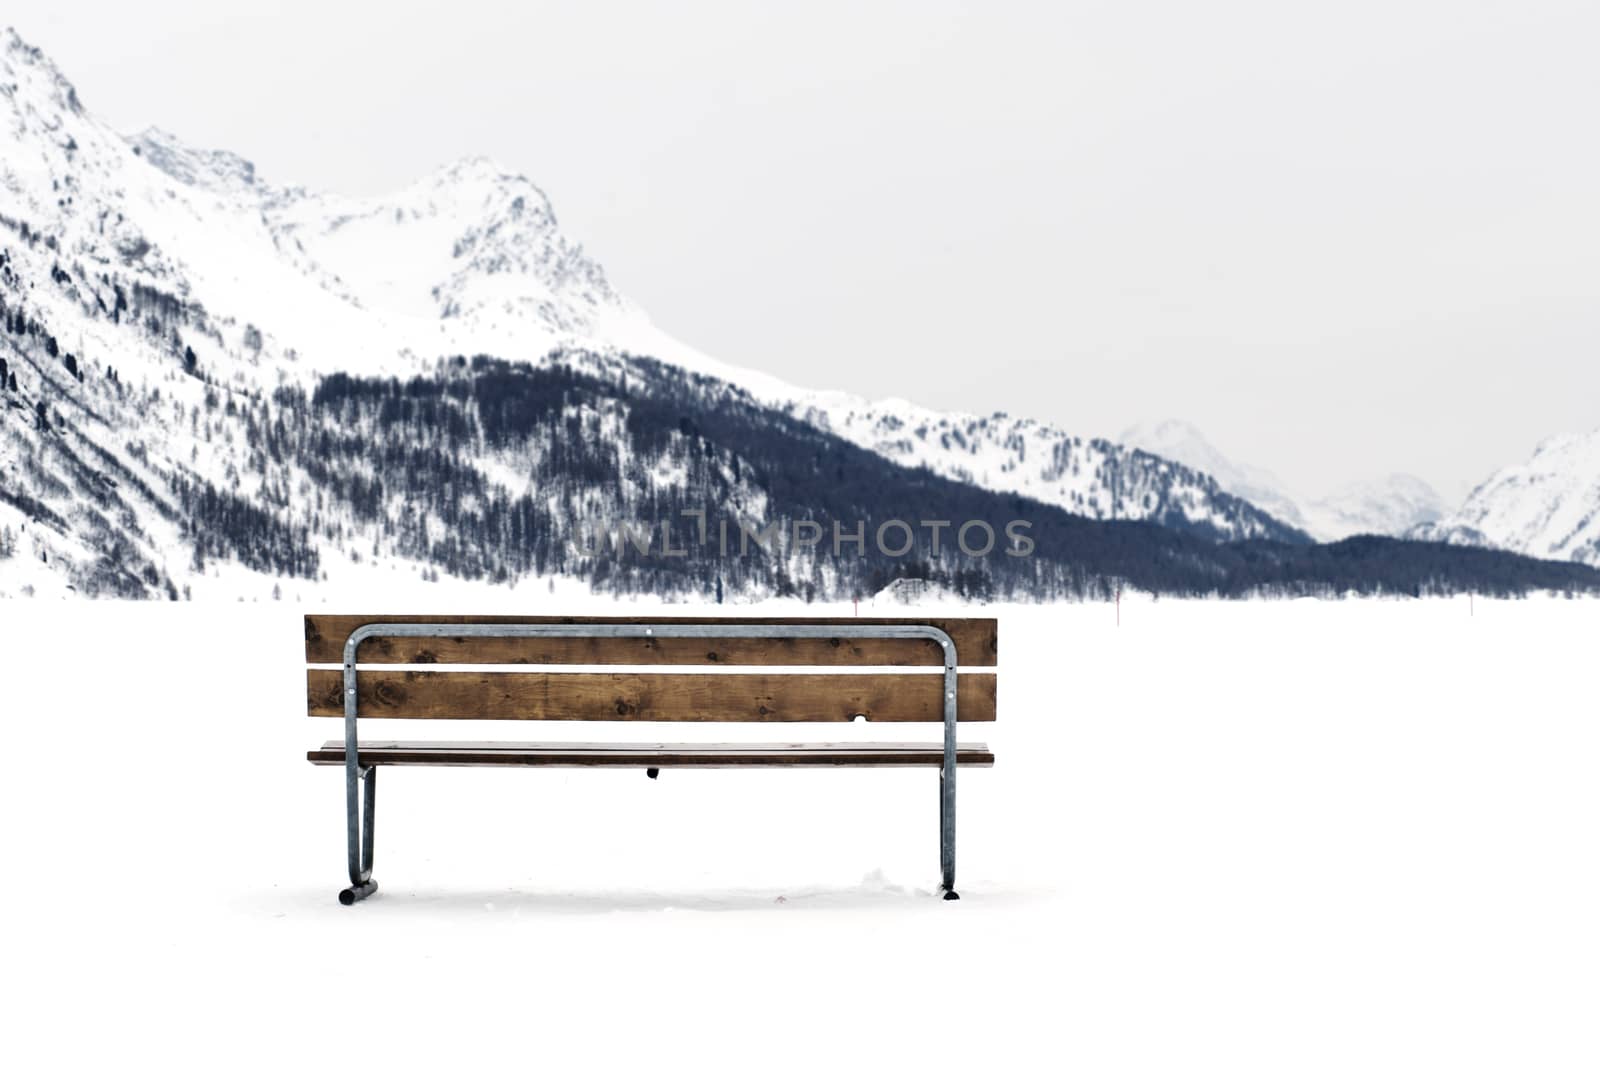 Wooden bench on a snowy winter landscape by ocusfocus